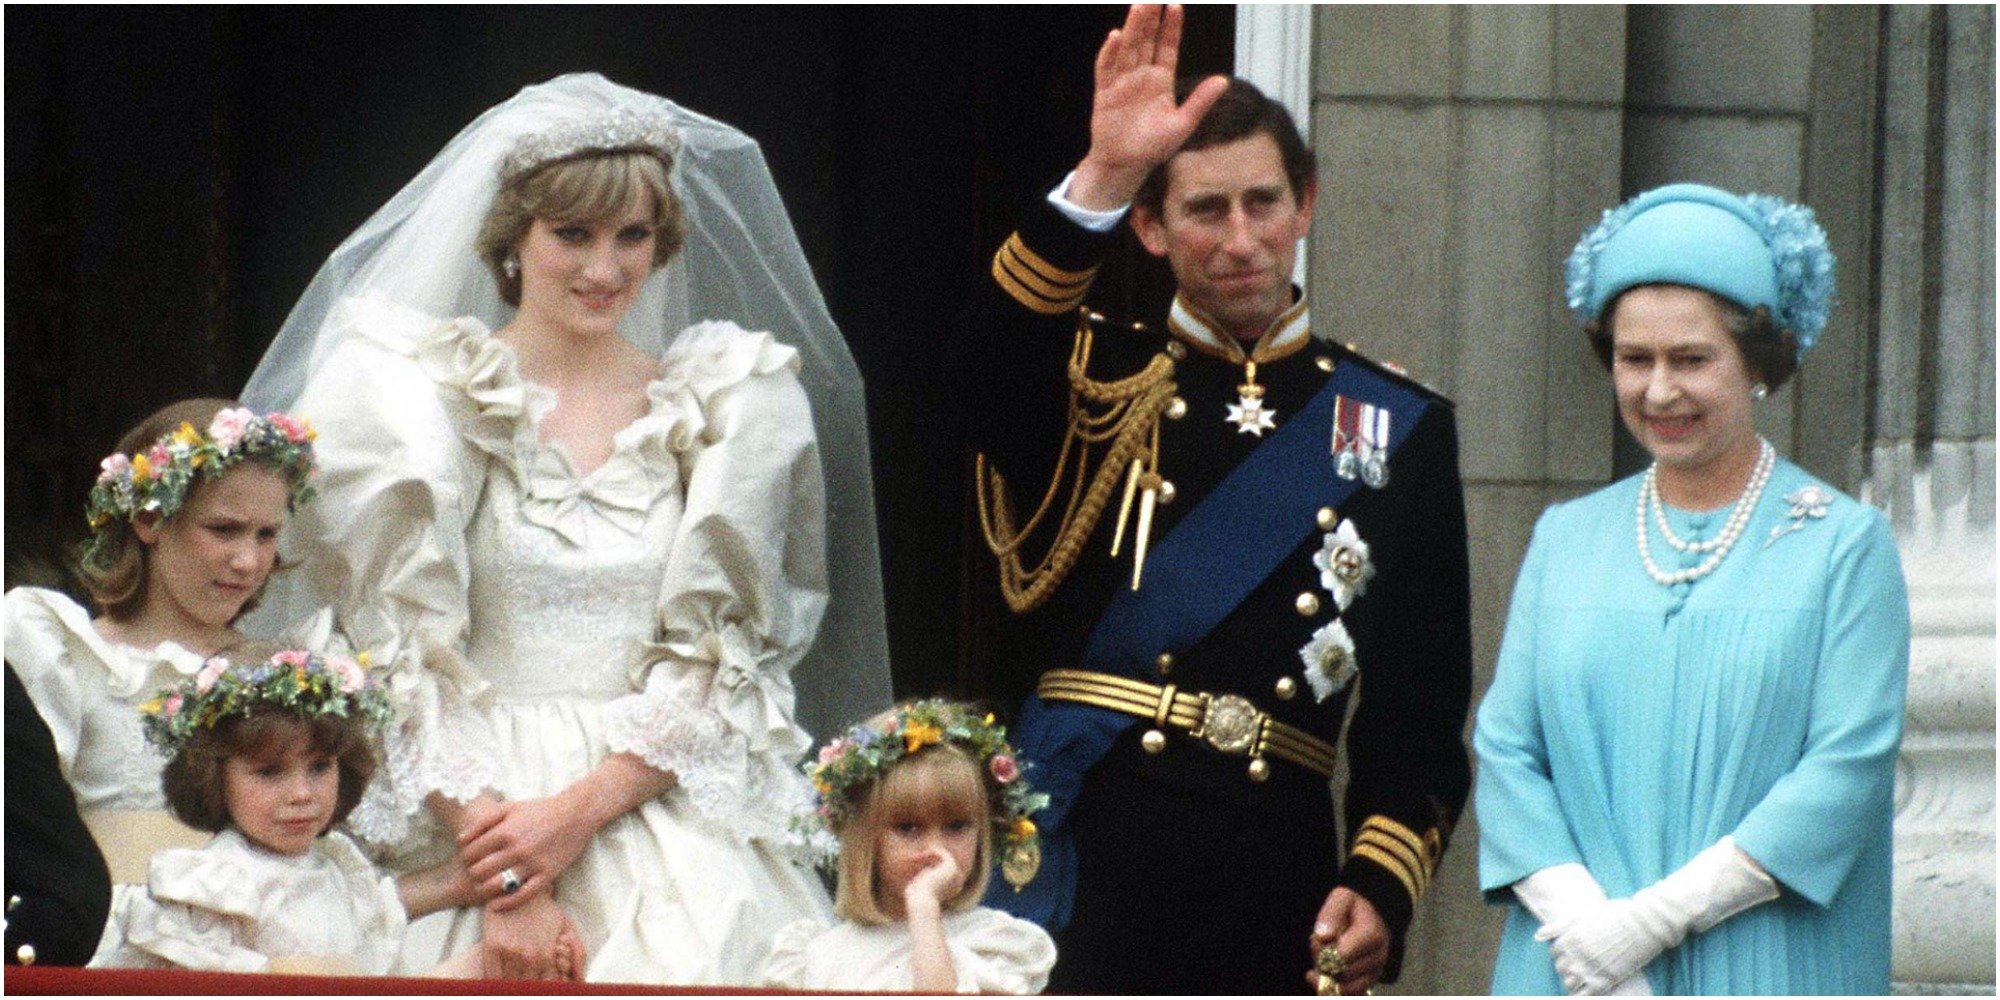 Princess Diana's marriage to Prince Charles was the boost the monarchy needed.